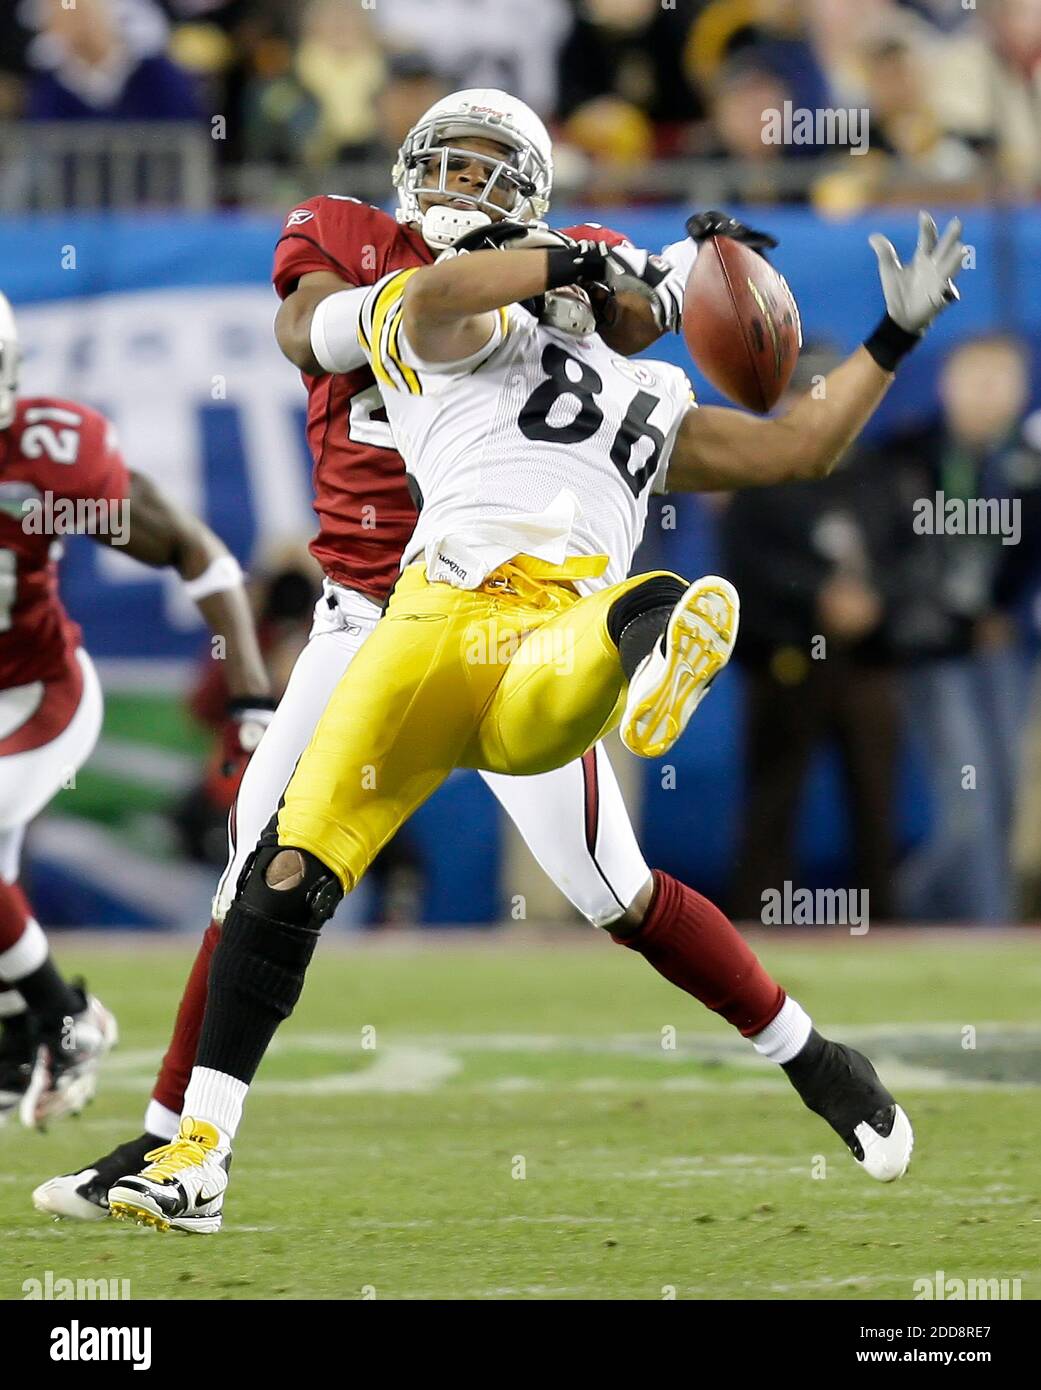 NO FILM, NO VIDEO, NO TV, NO DOCUMENTARY - Cardinal's D. Rodgers-Cromartie breaks up a pass to Steeler's Hines Ward in third quarter action as the Pittsburgh Steelers face the Arizona Cardinals in Super Bowl XLIII at Raymond James Stadium in Tampa, Florida, Sunday, February 1, 2009. Photo by Mark Cornelison/Lexington Herald-Leader/MCT/Cameleon/ABACAPRESS.COM Stock Photo